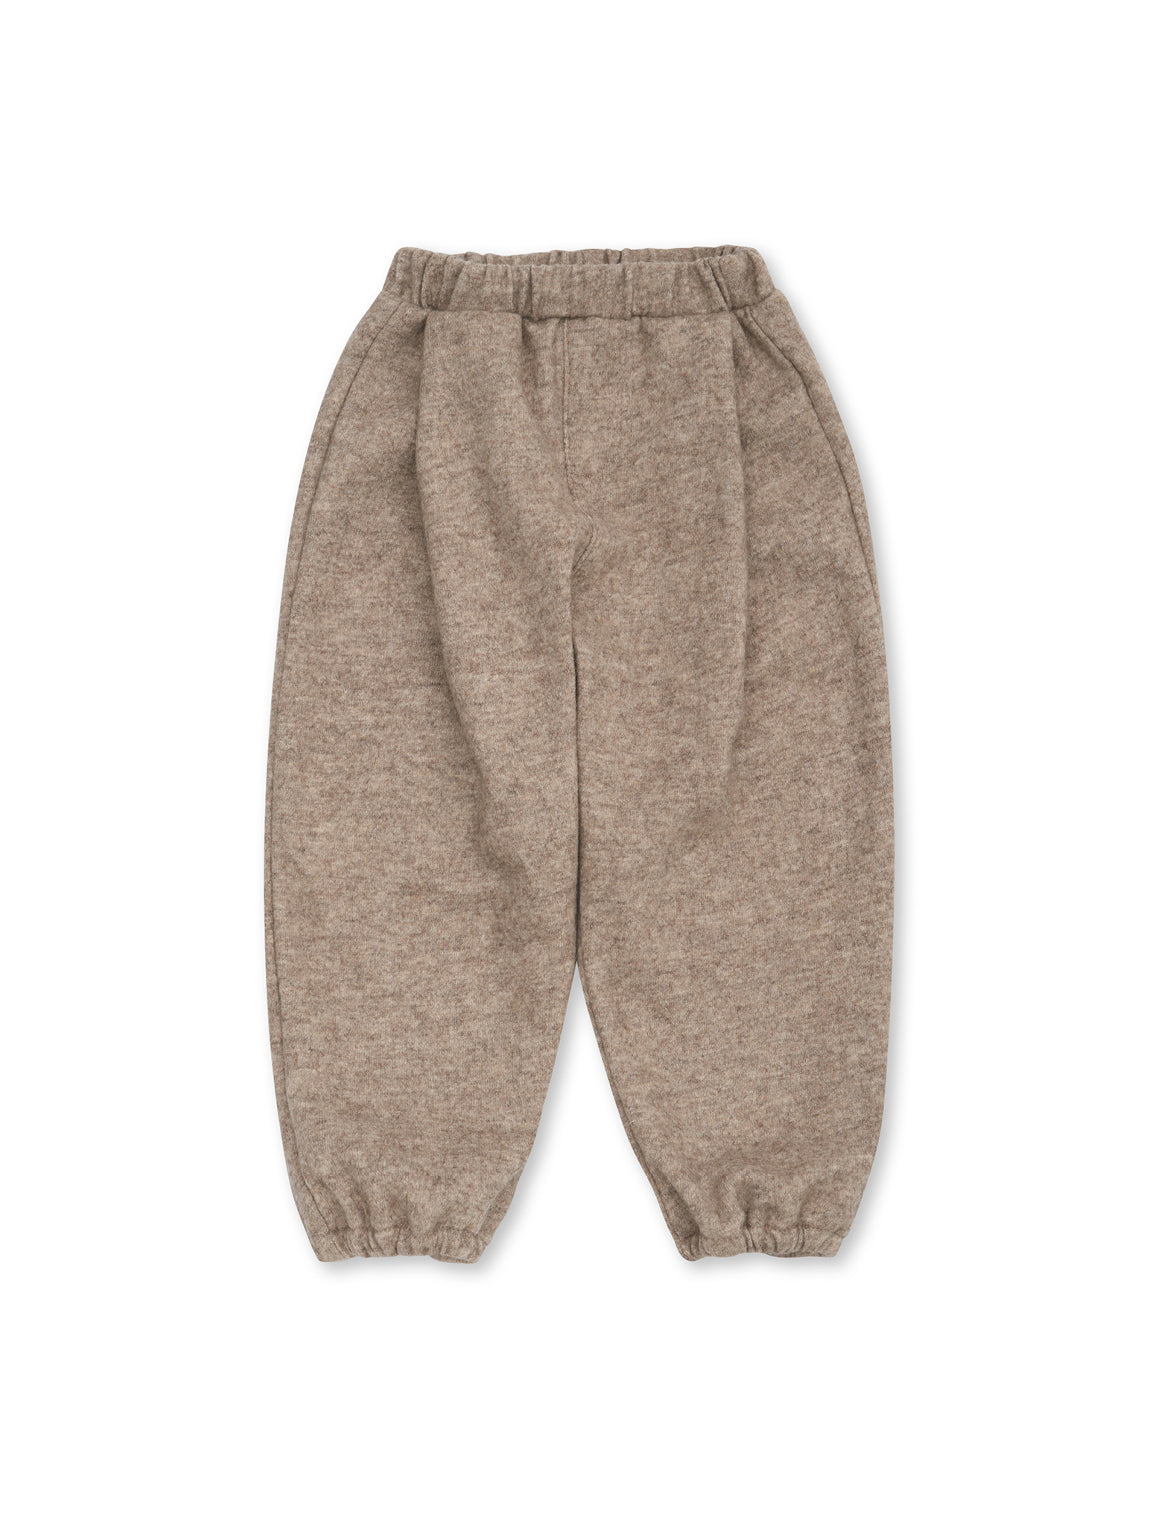 Boys' Designer Pants, oatmeal, wool/polyester blend, ages 1 to 6.